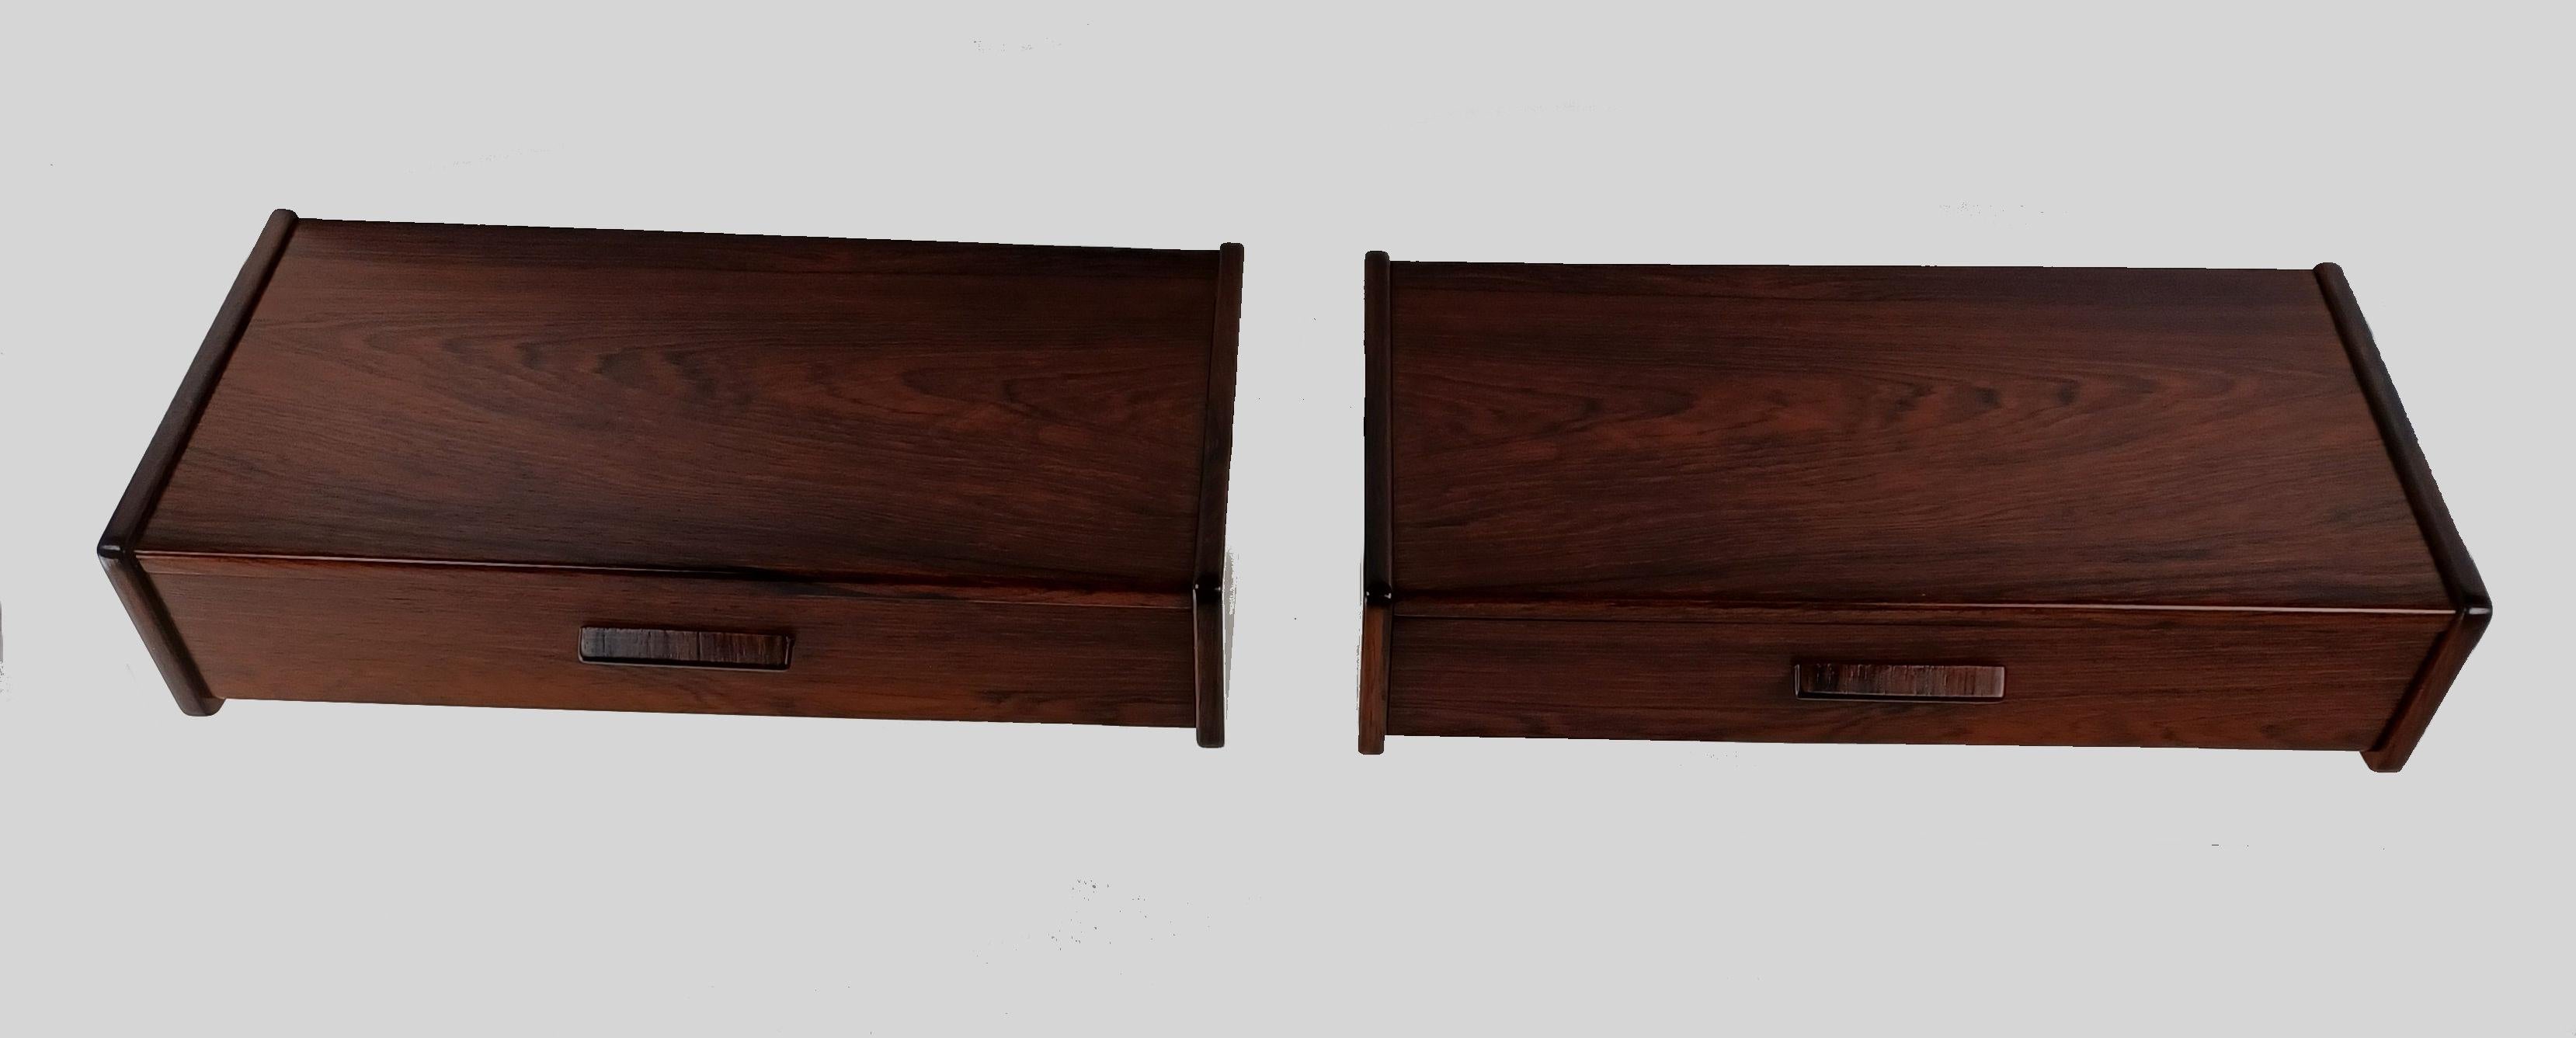 Set of two fully restored Danish Poul Volther floating rosewood nightstands.

The nightstands are examples of the minimalistic and functional yet beautiful design and advanced craftmanship that characterized Danish midcentury furniture. 

The